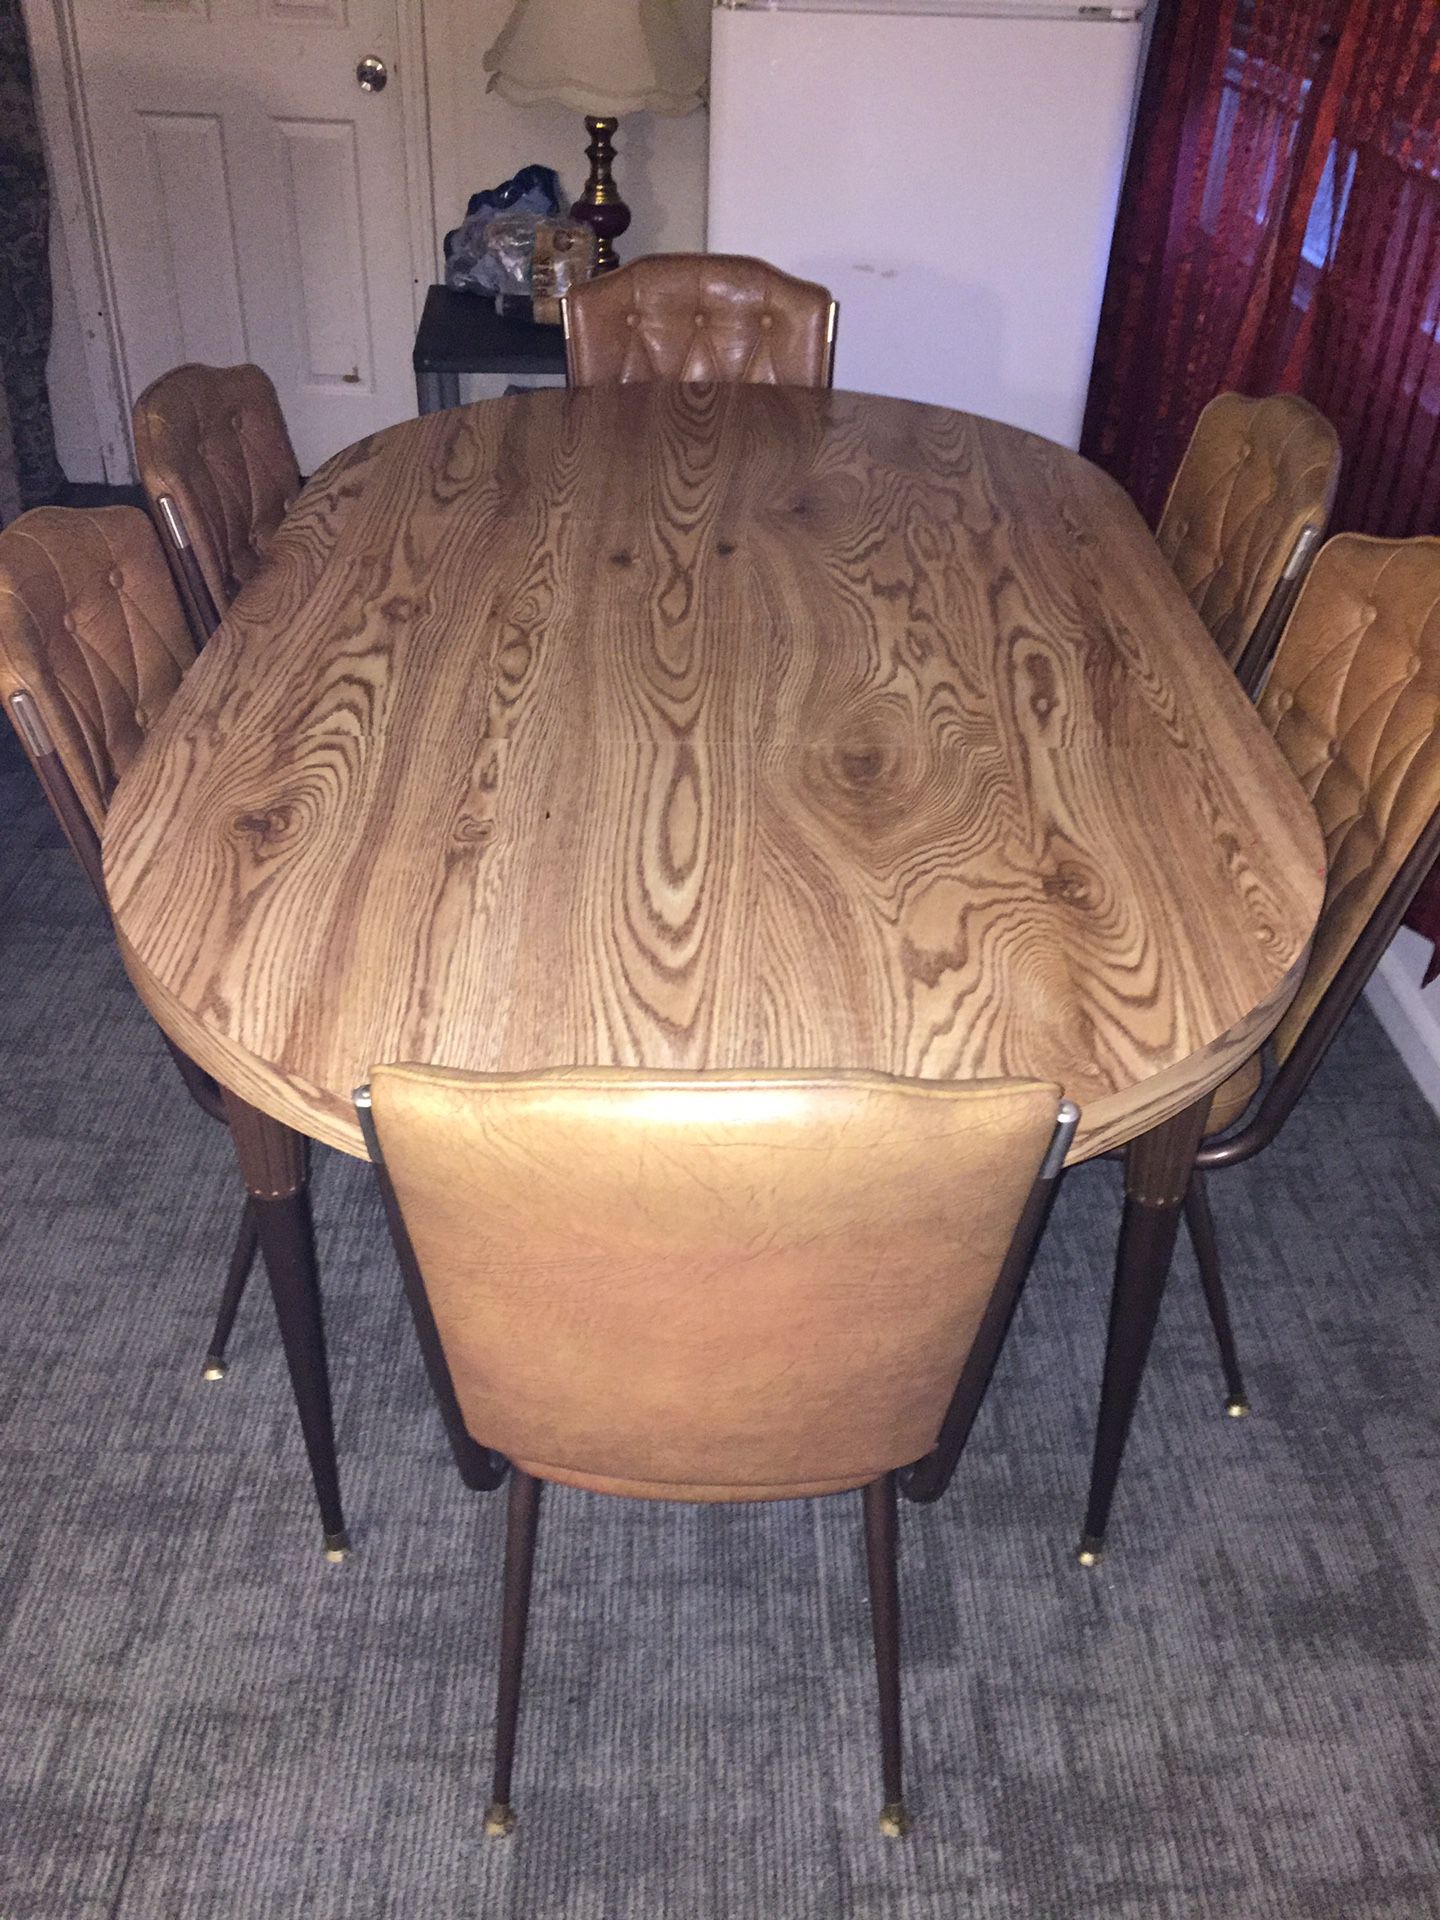 Vintage kitchen table with 6 leather chairs